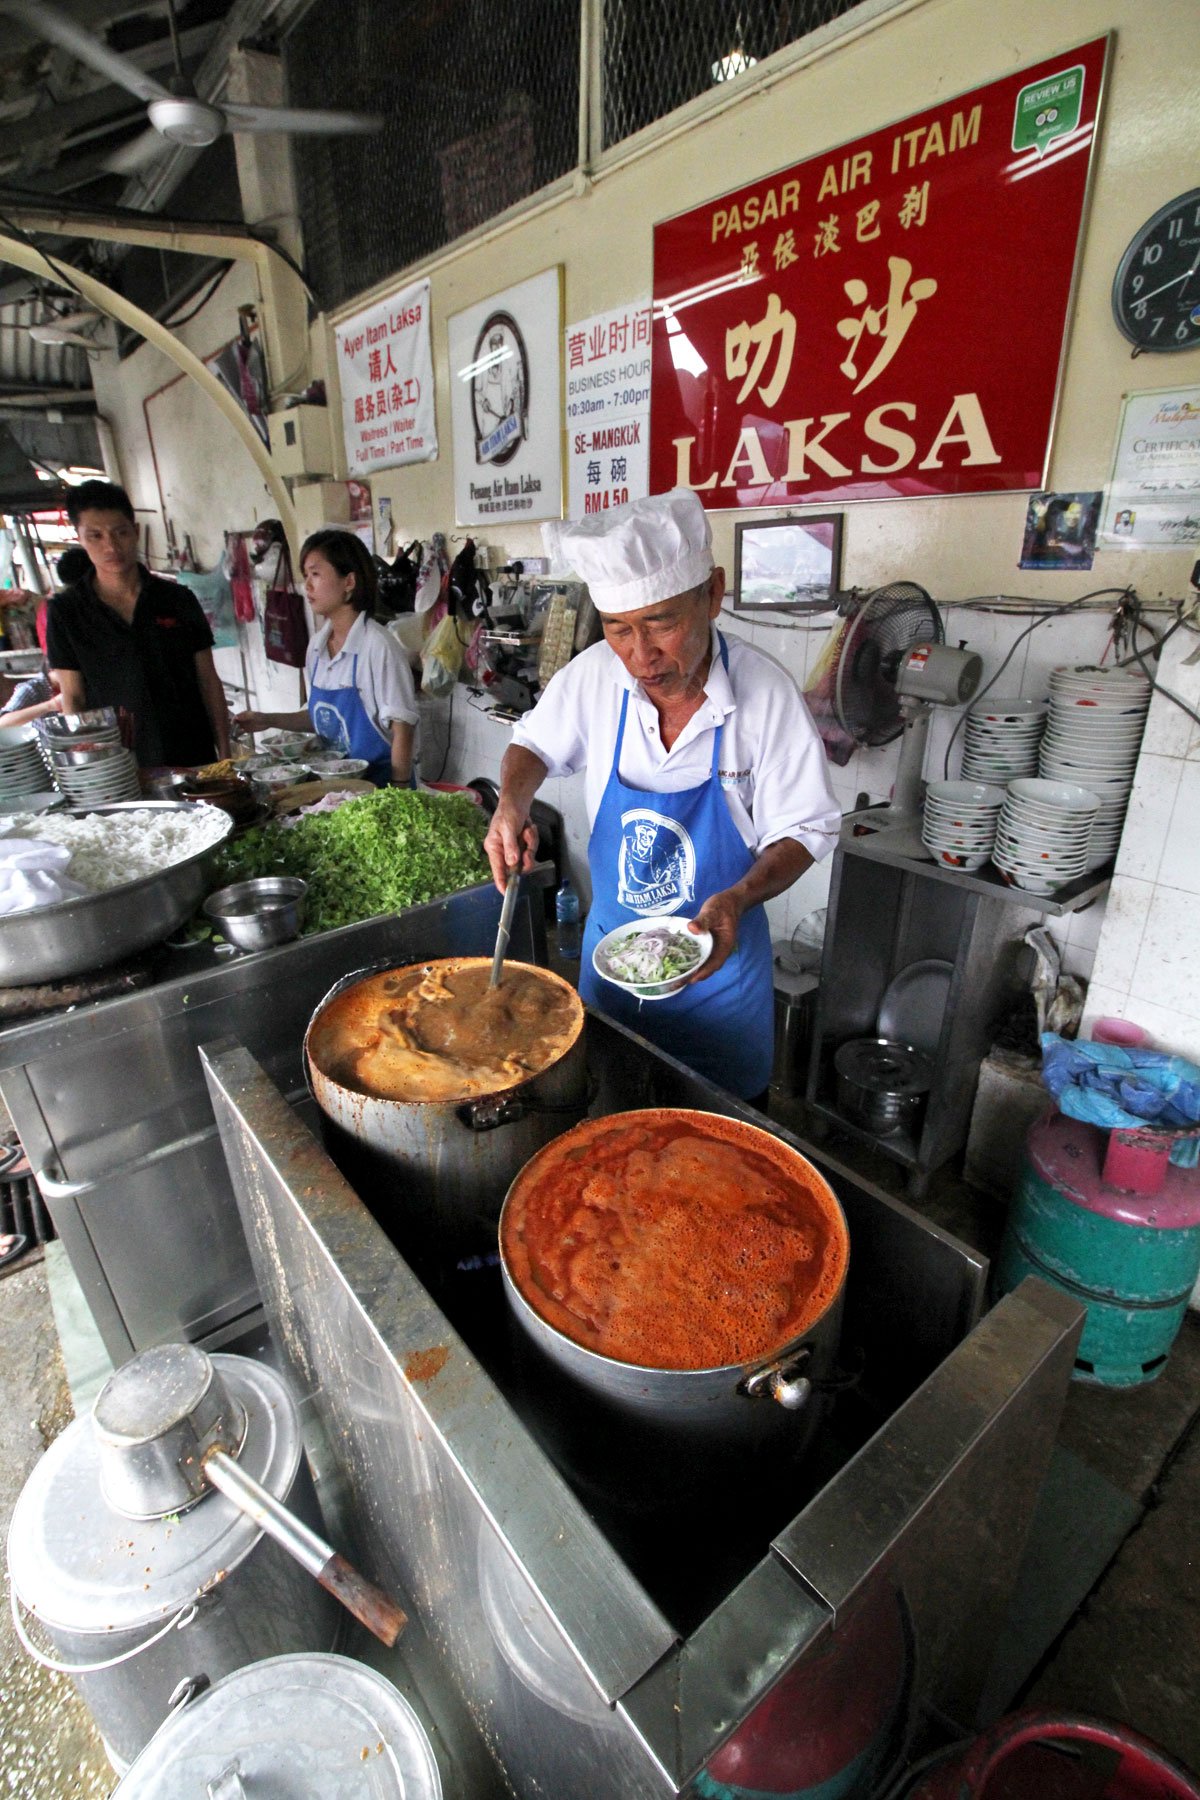 What to Eat in Penang, Malaysia